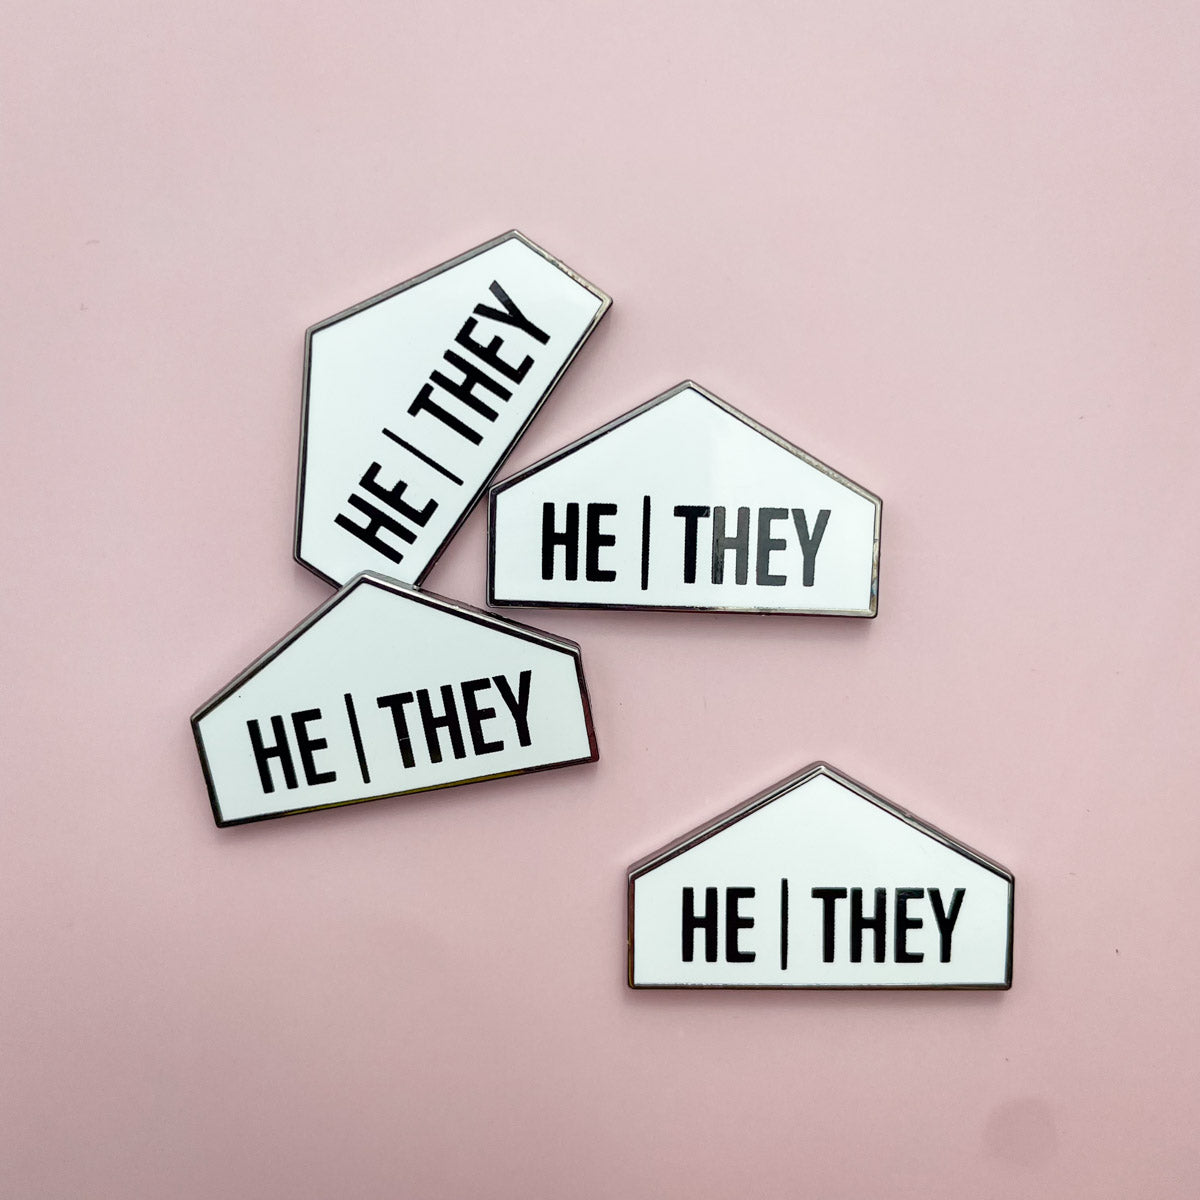 Pronoun + Pride Flag Interchangeable Magnetic Pin Set by Flags For Good | He They Pronoun Top Badges